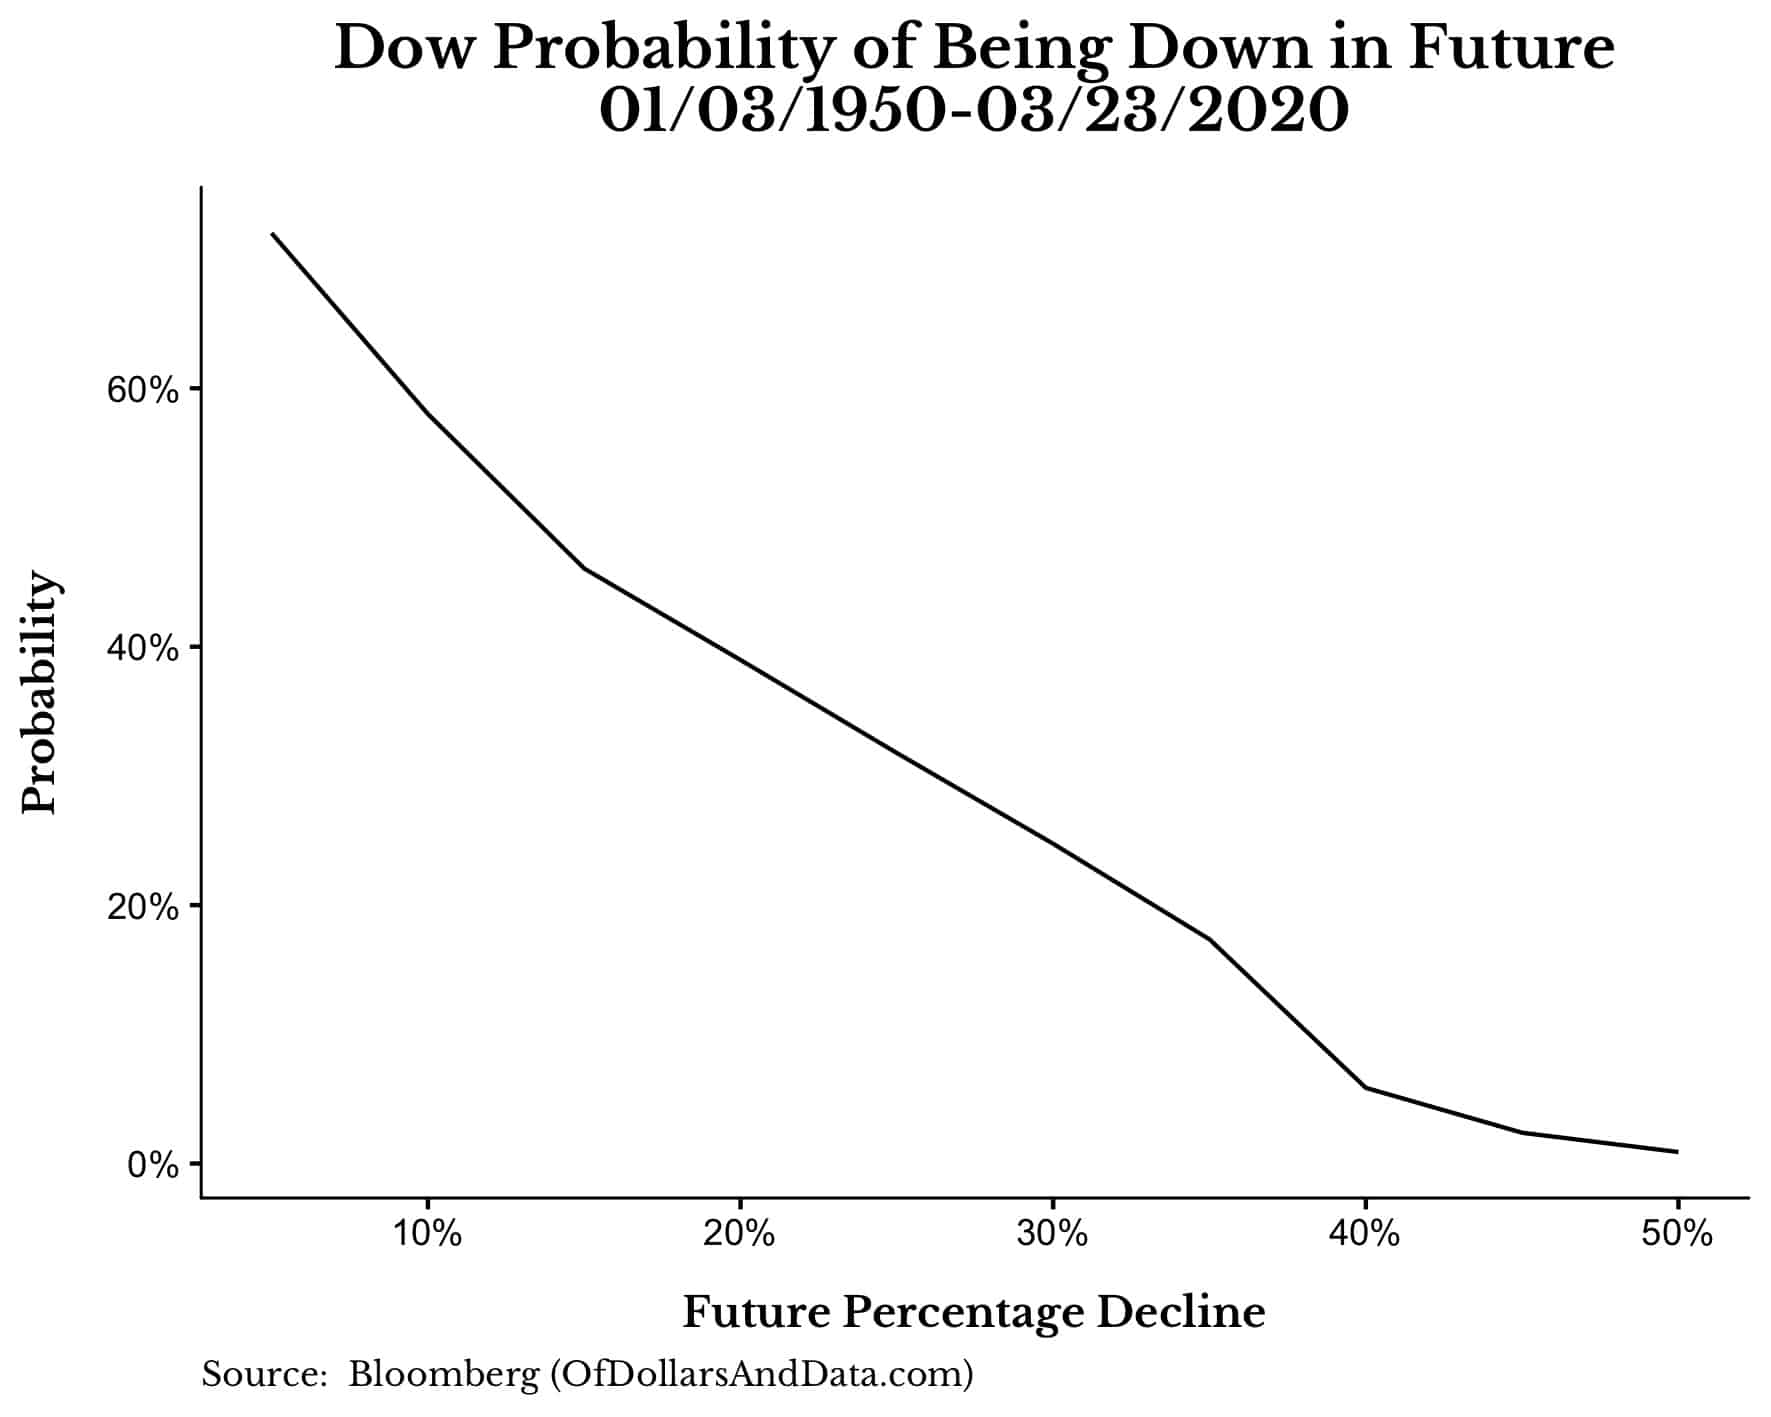 Dow Jones Industrial Average probability of being down in the future based on data from 1950 to 2020.